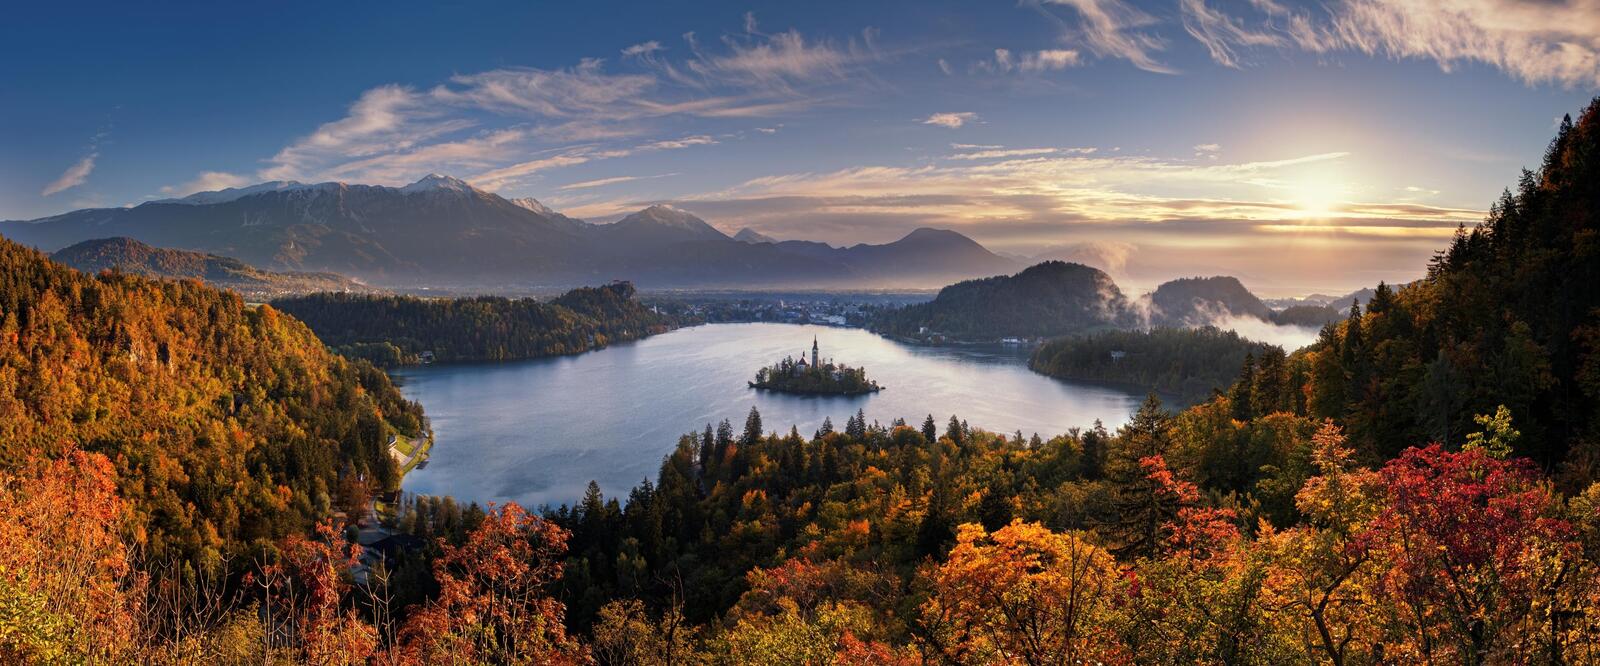 Wallpapers panorama Lake Bled Slovenia on the desktop